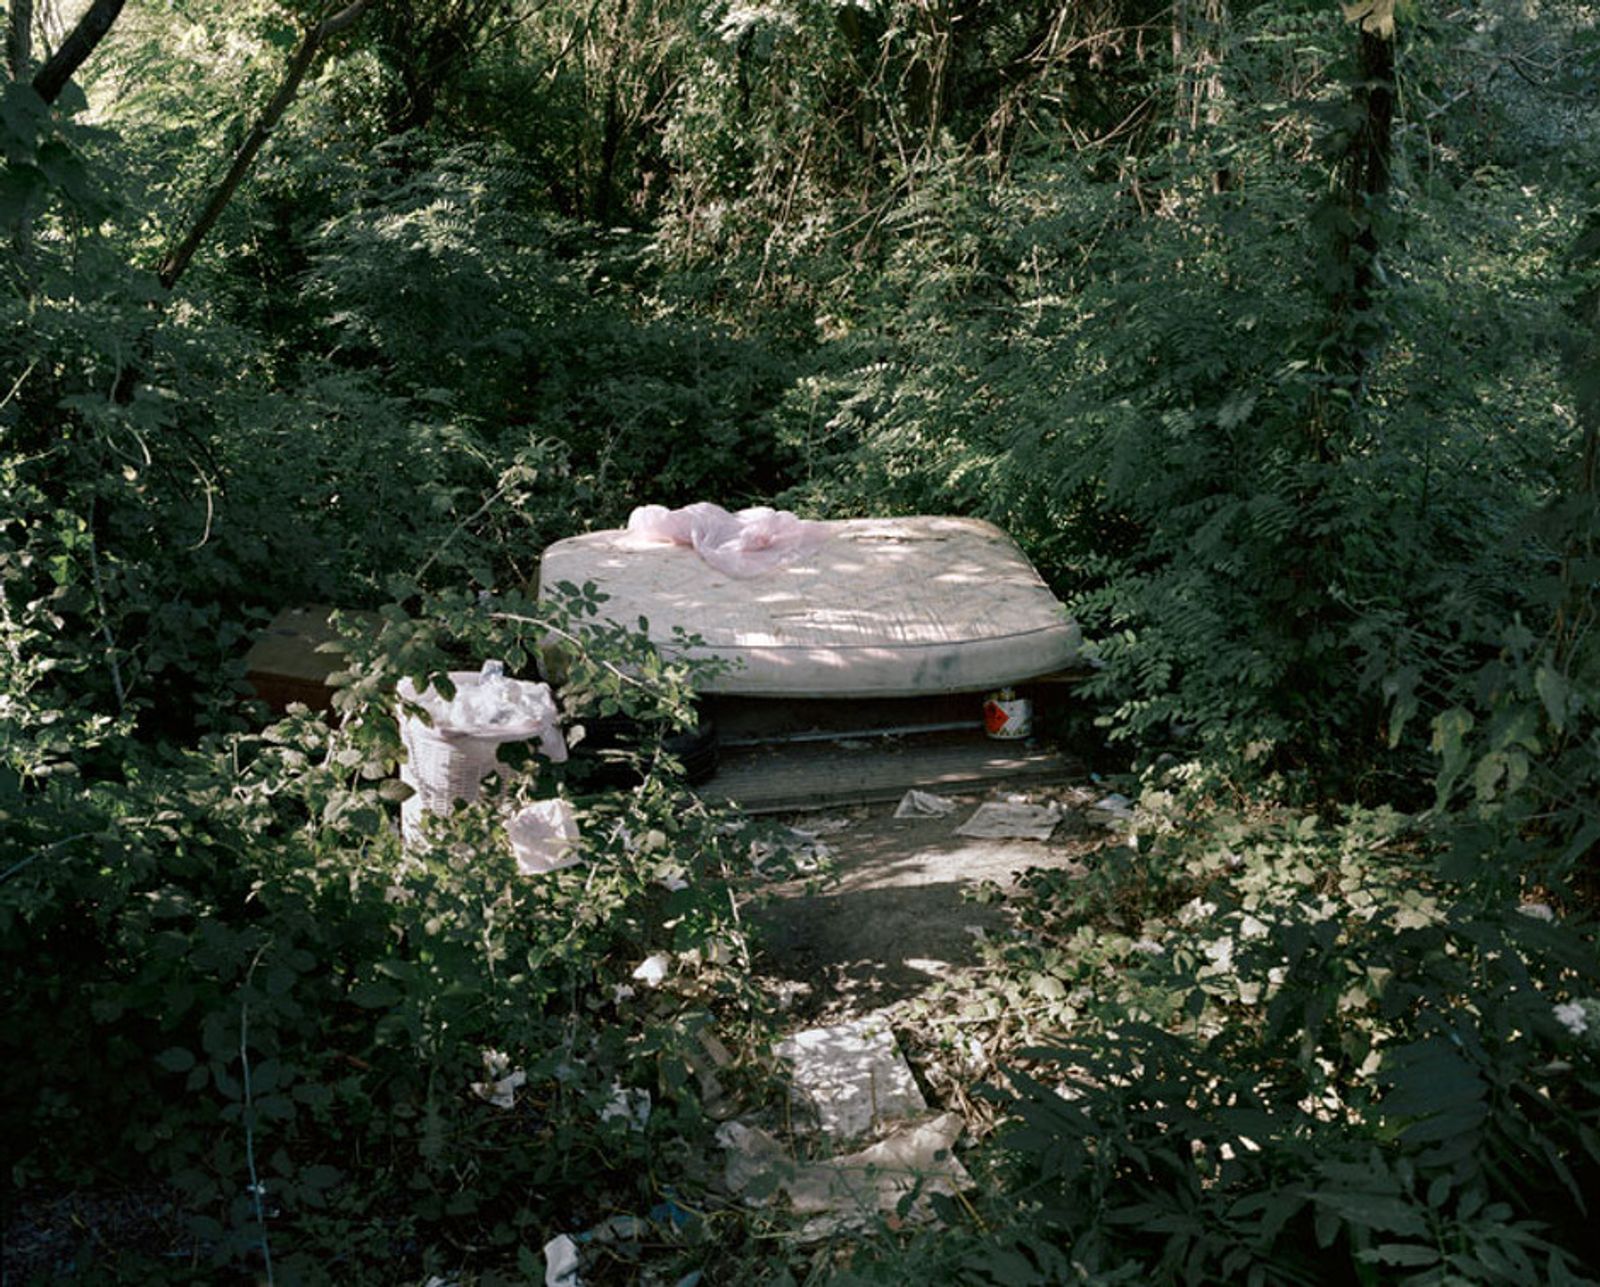 © Paolo Patrizi - An open-air room used by sex workers in a field on the outskirts of the city,Rome, Italy